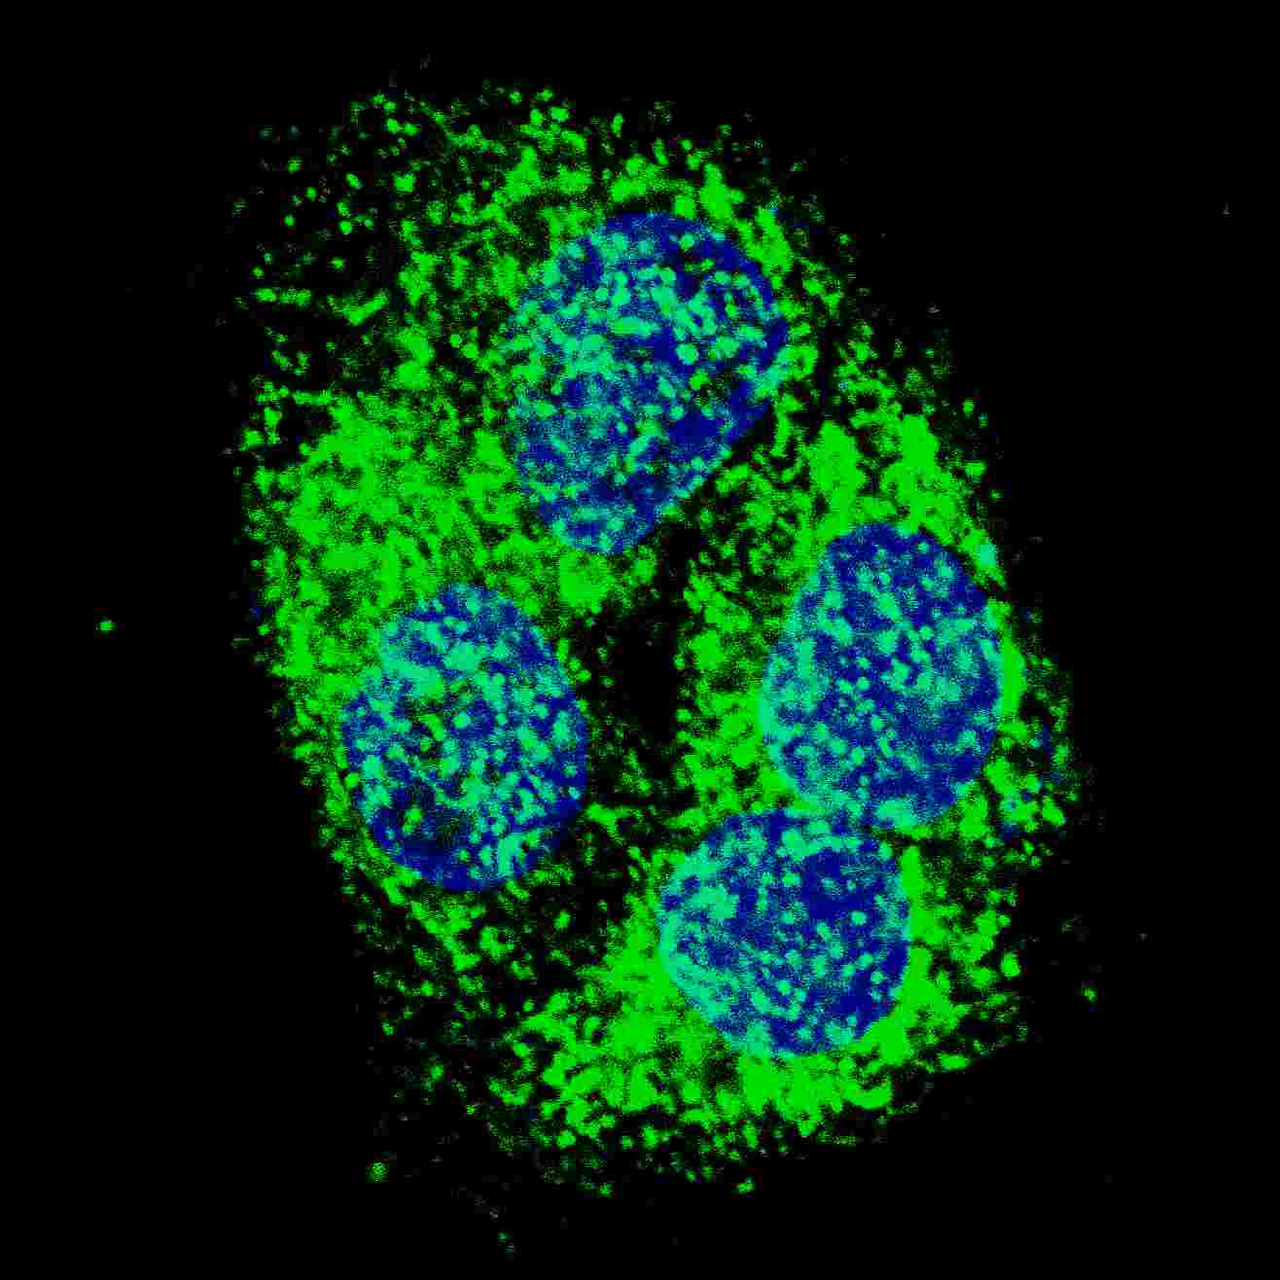 Fluorescent confocal image of HepG2 cells stained with BNIP3 (BH3 Domain Specific) antibody. HepG2 cells were fixed with 4% PFA (20 min) , permeabilized with Triton X-100 (0.2%, 30 min) . Cells were then incubated with BNIP3 (BH3 Domain Specific) primary antibody (1:500, 2 h at room temperature) . For secondary antibody, Alexa Fluor 488 conjugated donkey anti-rabbit antibody (green) was used (1:1000, 1h) . Nuclei were counterstained with Hoechst 33342 (blue) (10 ug/ml, 5 min) . BNIP3 immunoreactivity is localized to the cytoplasm of HepG2 cells.